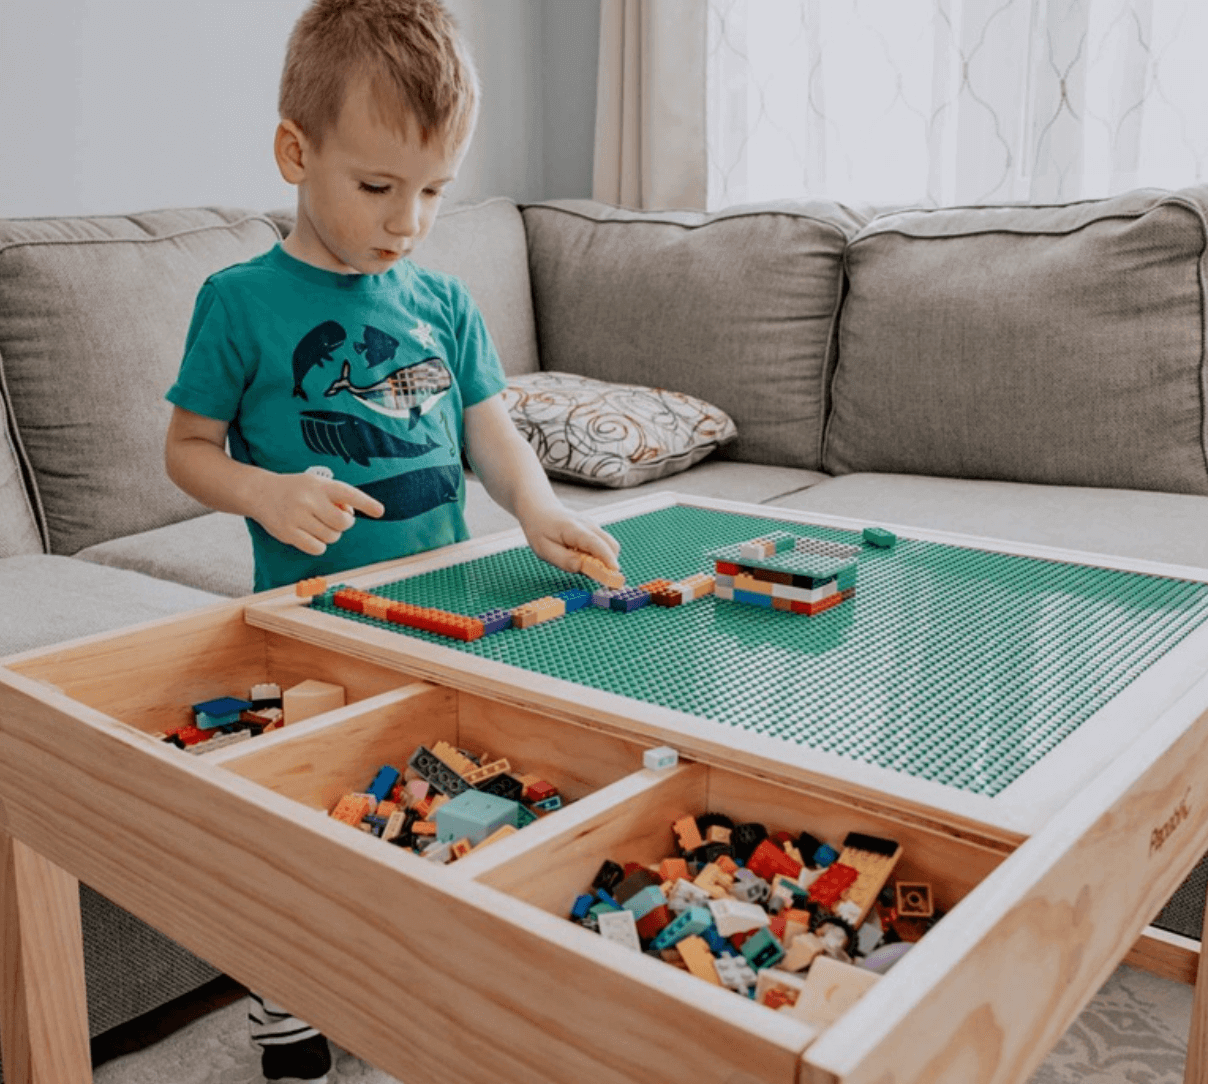 2-in-1 Solid Wood Kids Activity Bricks Table with Storage - Taylorson